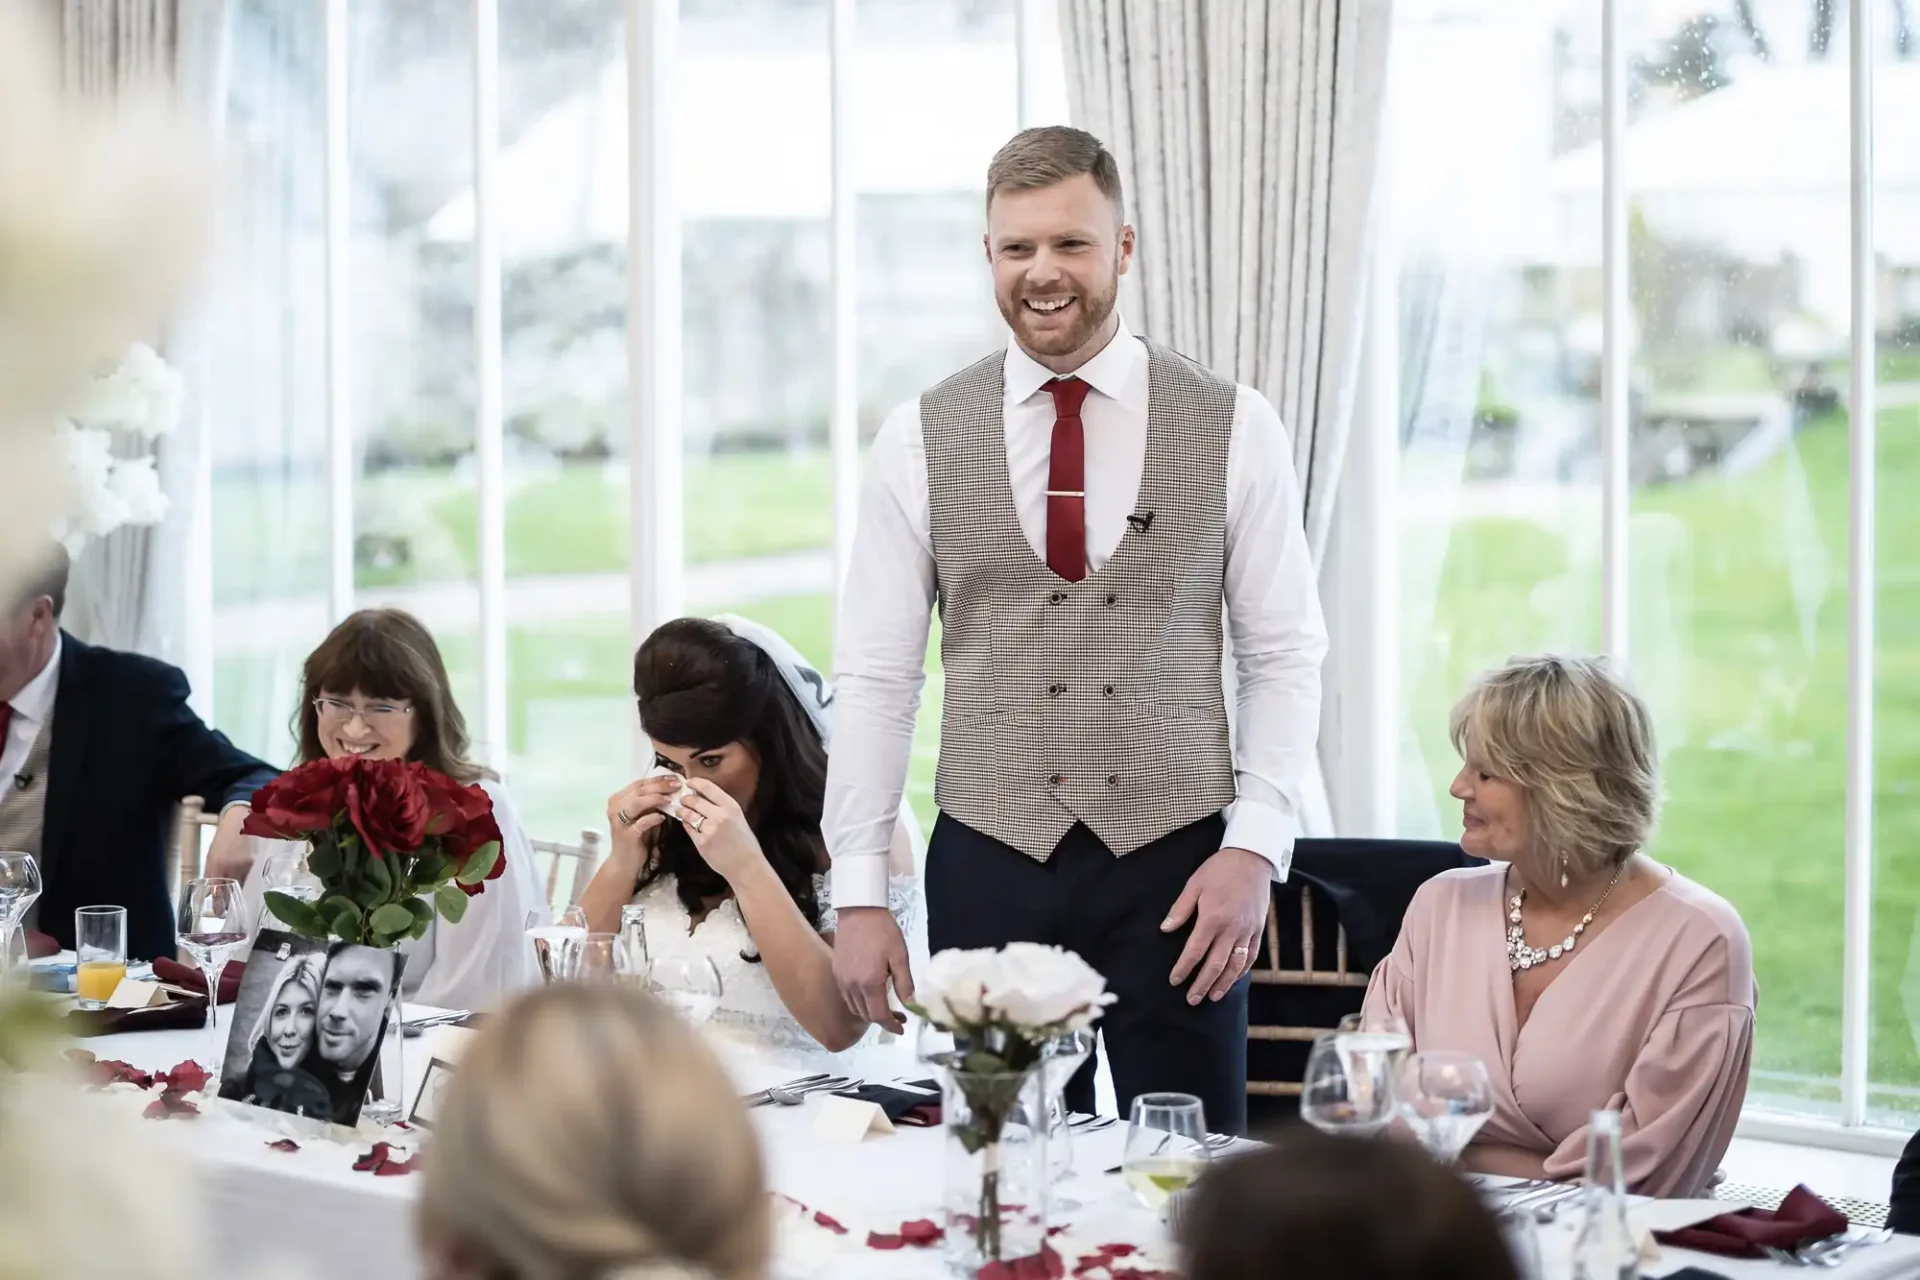 Man in a vest and tie standing and speaking at a formal dining event, with seated guests listening, some smiling.